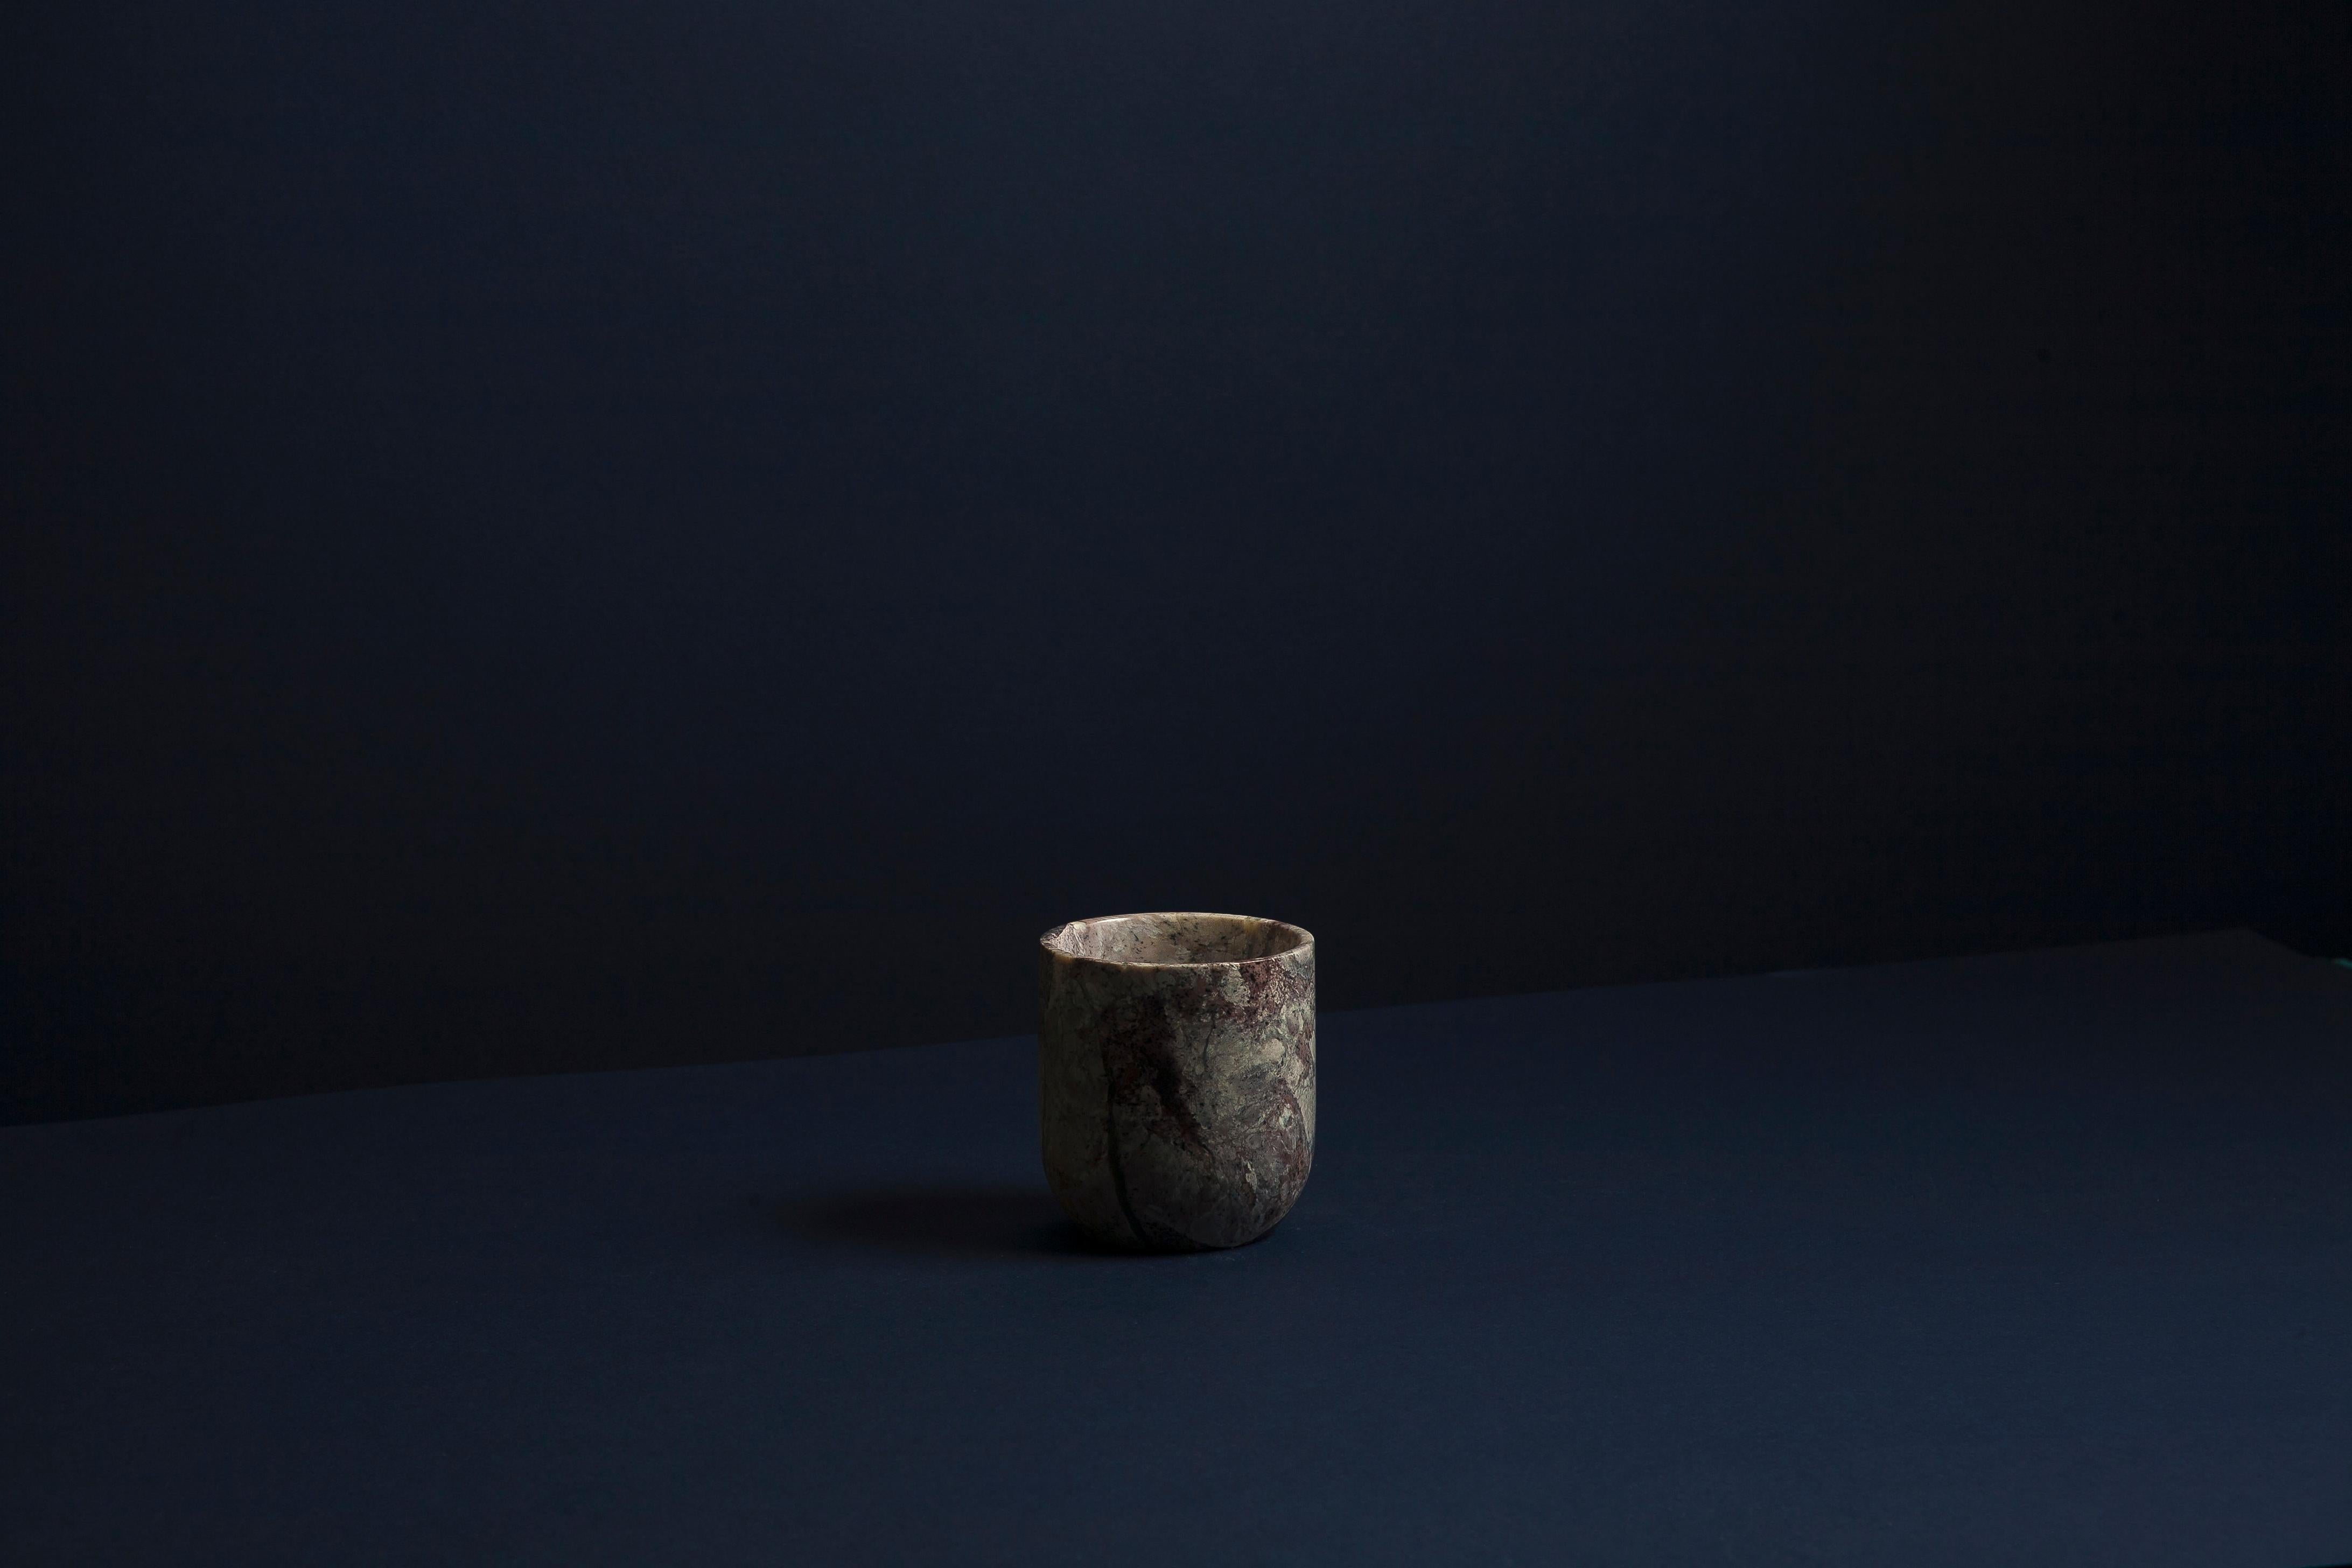 Monolith by Bravo Studio
Monolith XX2
Materials: Cobarbalita stone
Dimensions: Ø 16 × 20.5 cm

 
Monolithic objects in Cobarbalita stone
This new series of objects developed by the Chilean design studio bravo! Continues with the logic of